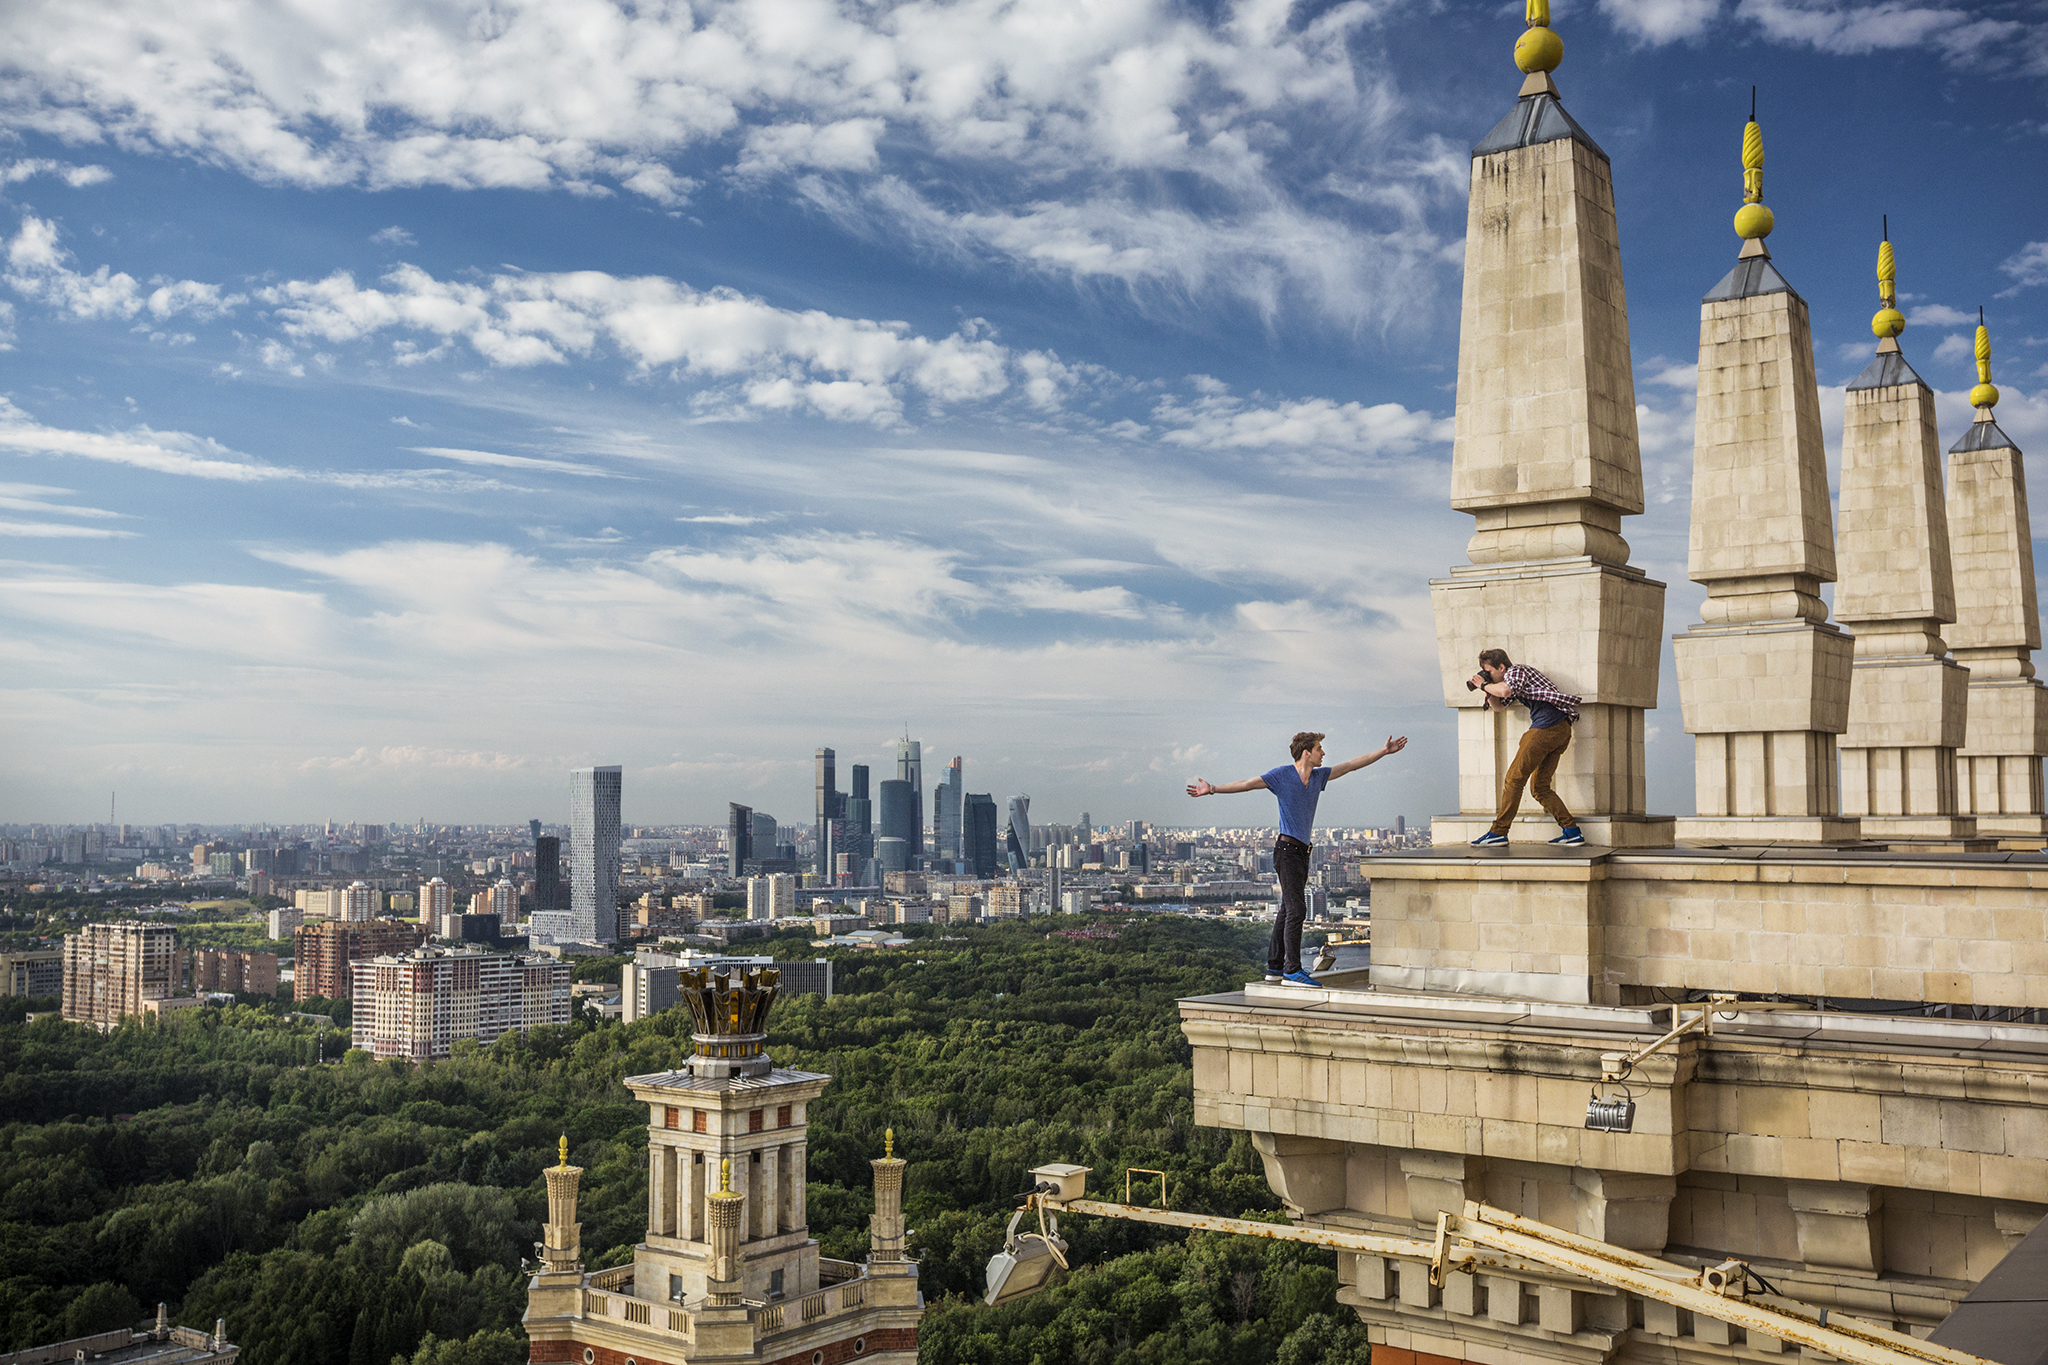  Kirill Vselensky perches on a cornice in Moscow as Dima Balashov takes his photograph to celebrate their adventures on Instagram. The 24-year-olds are prominent members of the city's death-defying "roofer" or skywalker community. They scale Russia's